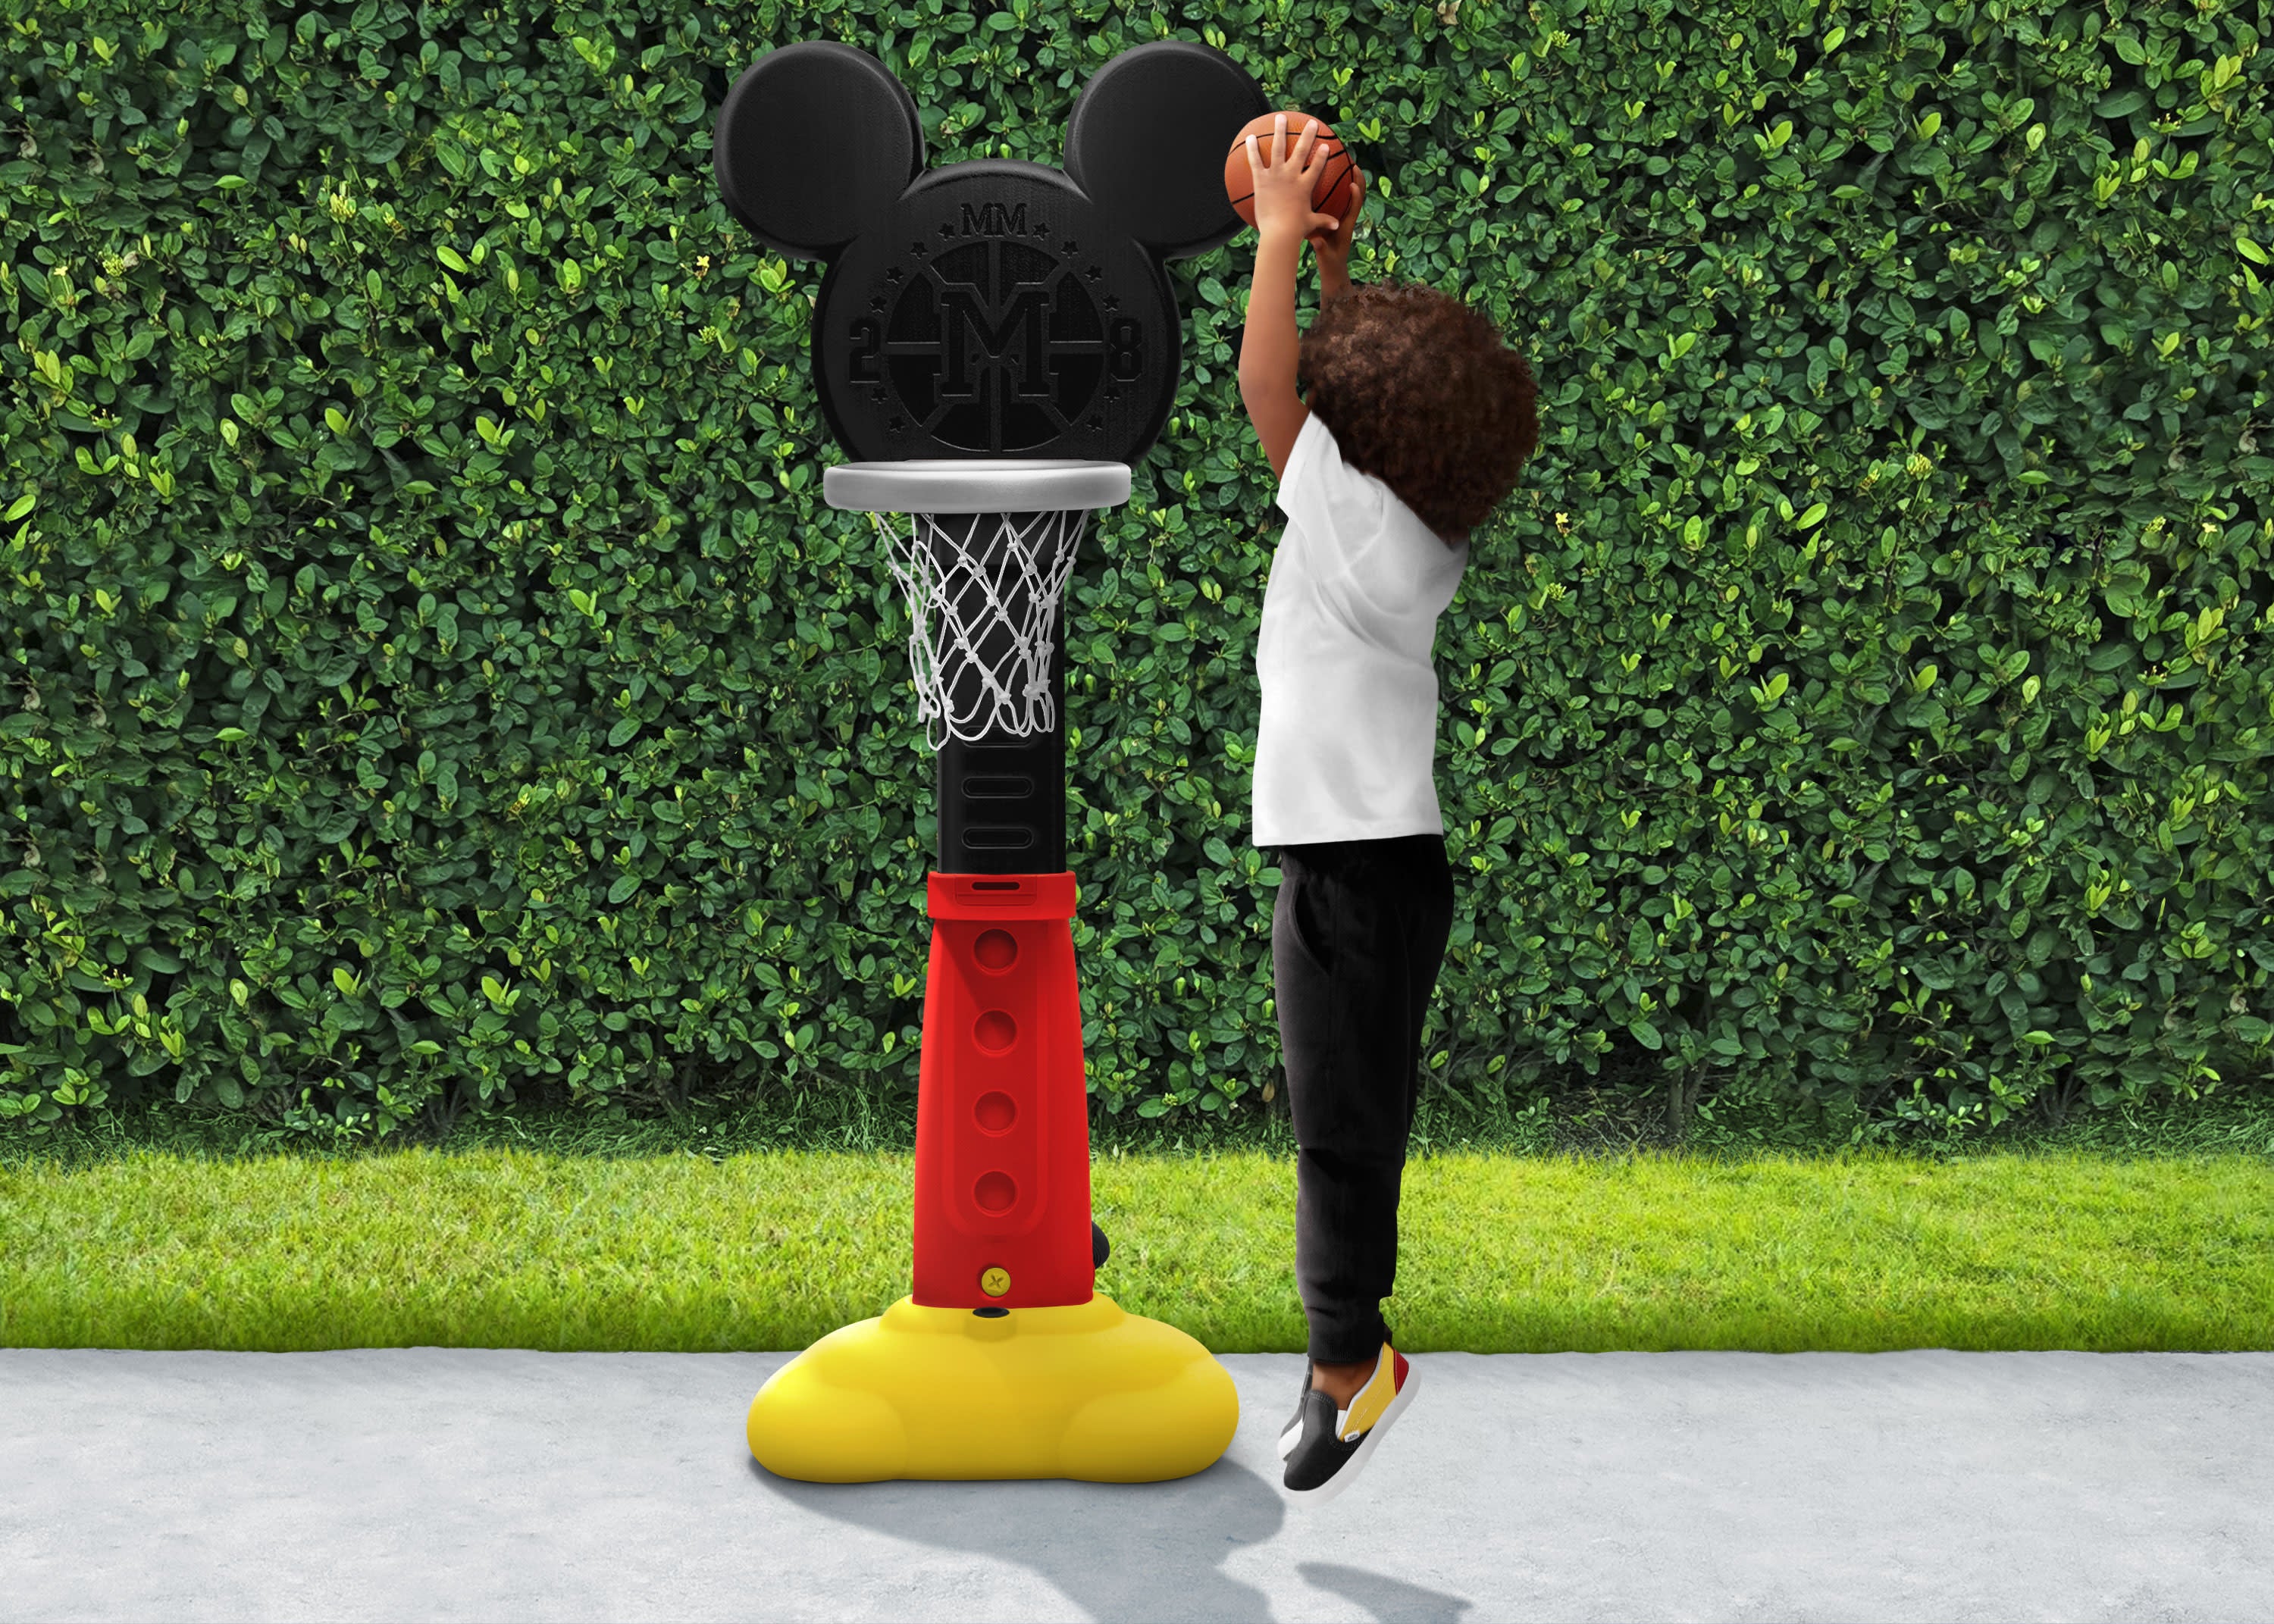 Disney Mickey Mouse Plastic Basketball Set by Delta Children – Includes  Basketball Hoop, 1 Basketball, Ring Toss Game with 3 Rings, Growth Cart and